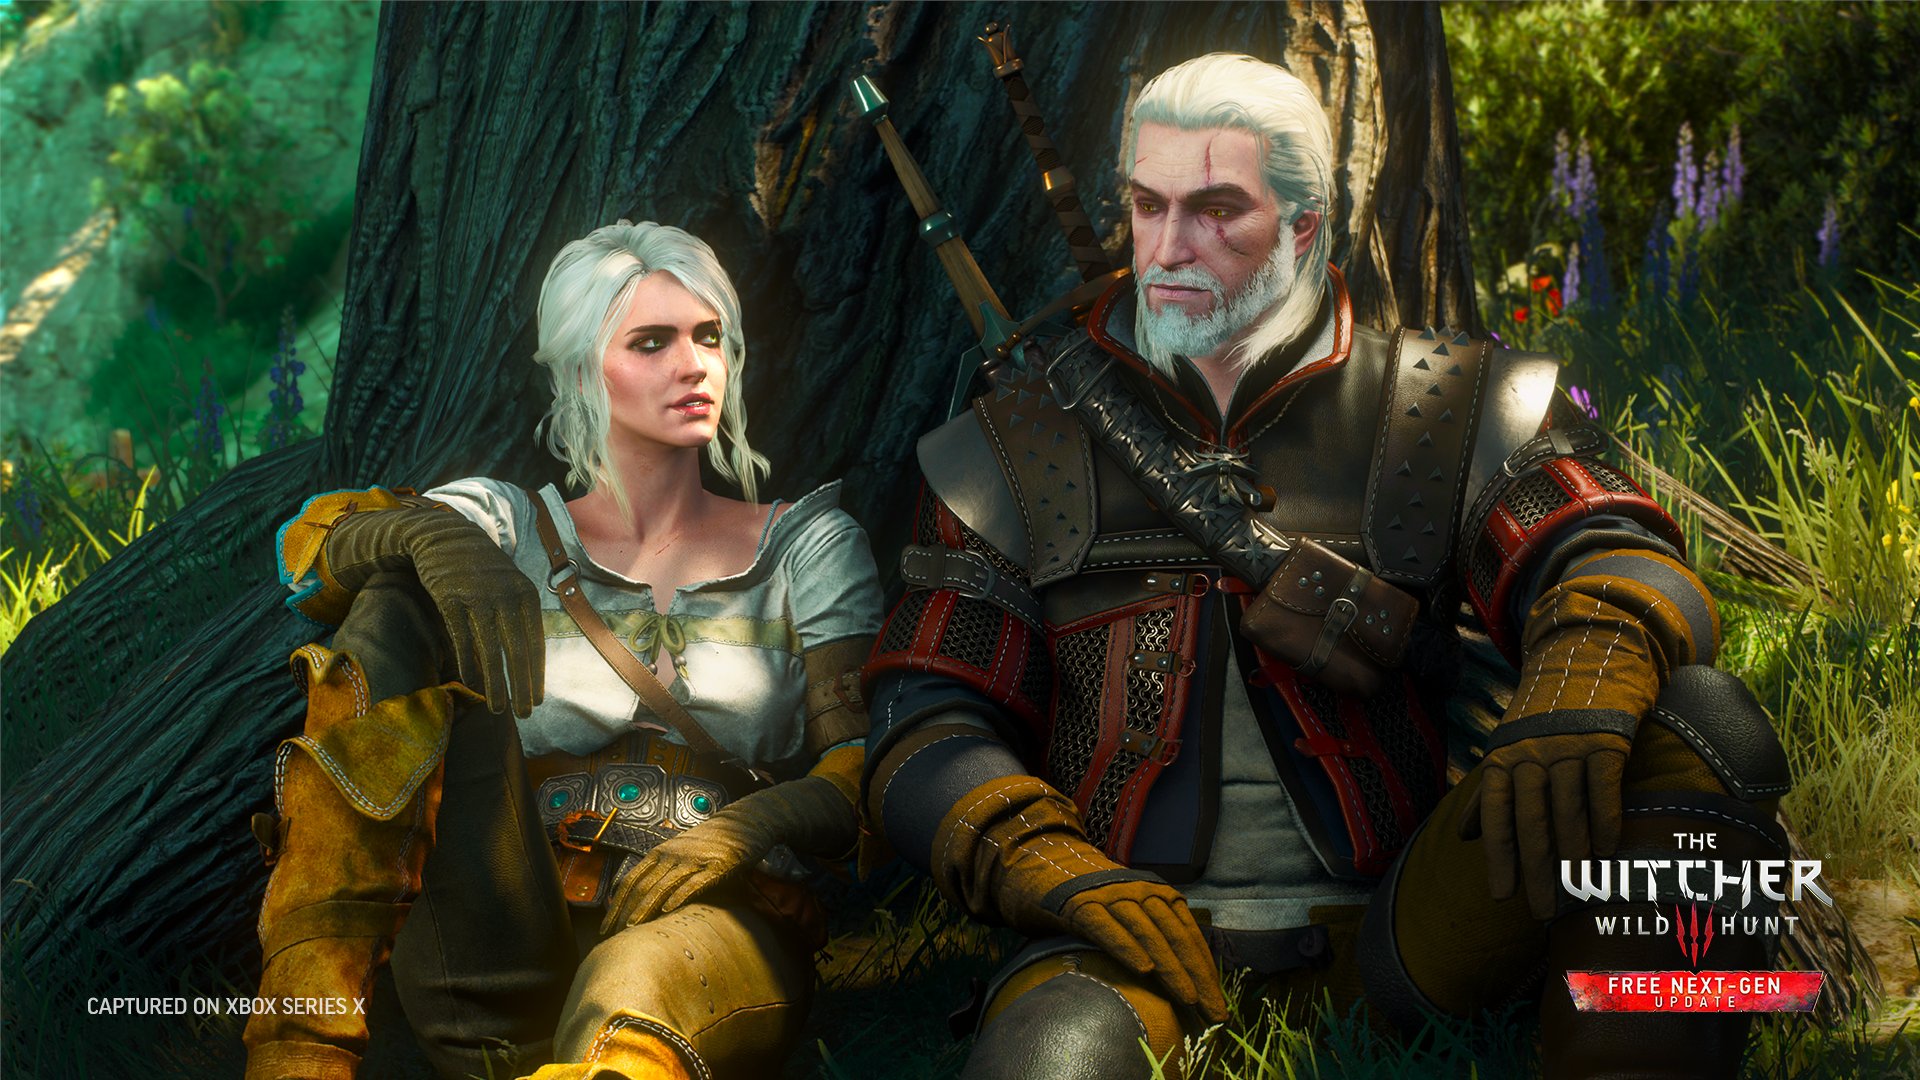 The Witcher 3 Geralt and Ciri